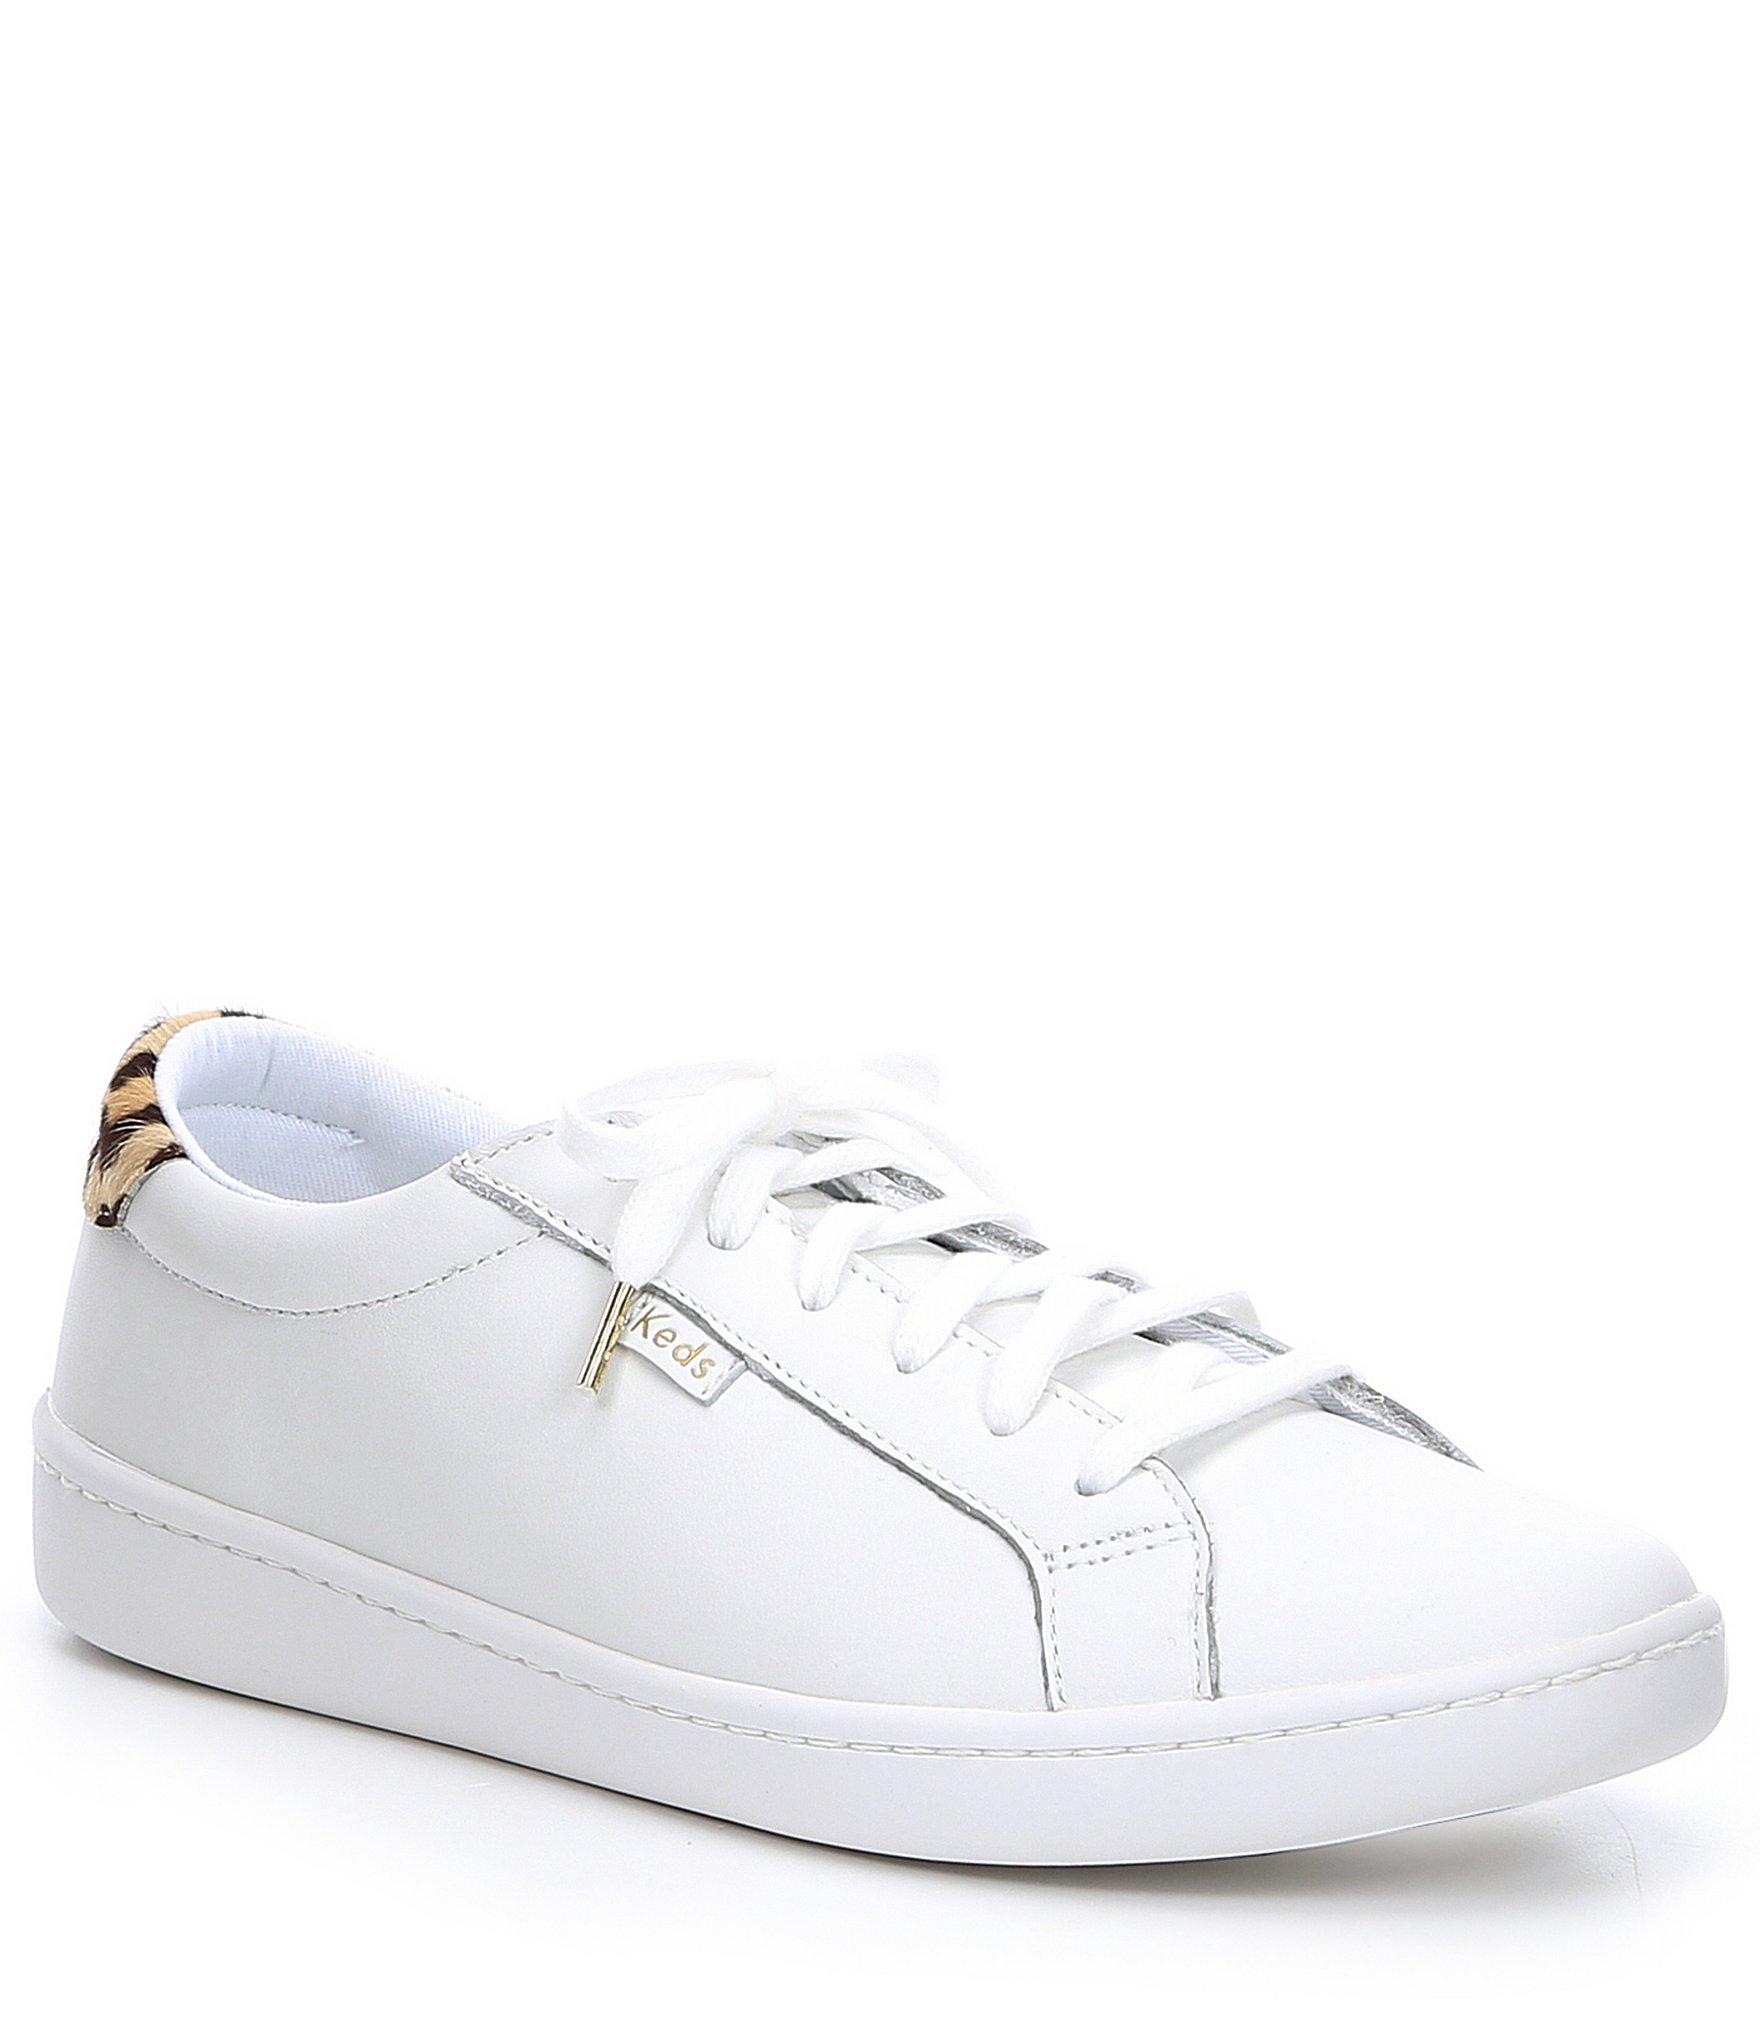 Kate Spade Keds X Ace Leather Leopard Print Sneakers in White,Leopard ...